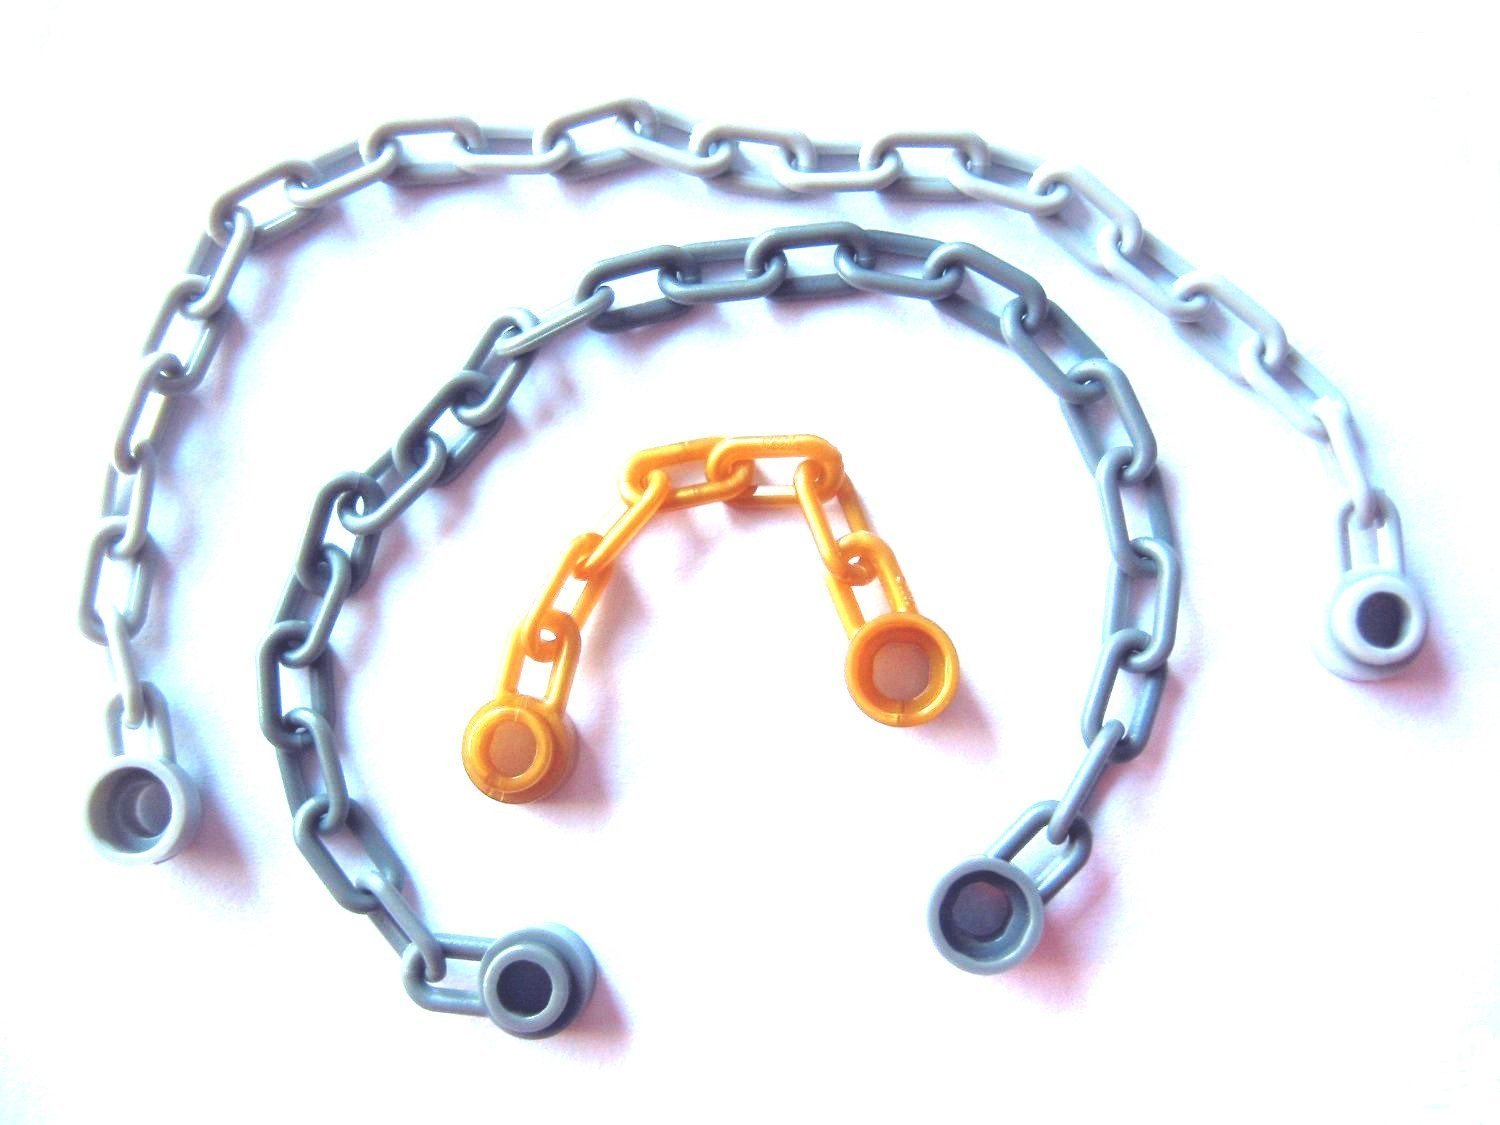 Lego City Different Chains Available In A Selection Of Lengths And Set Of W